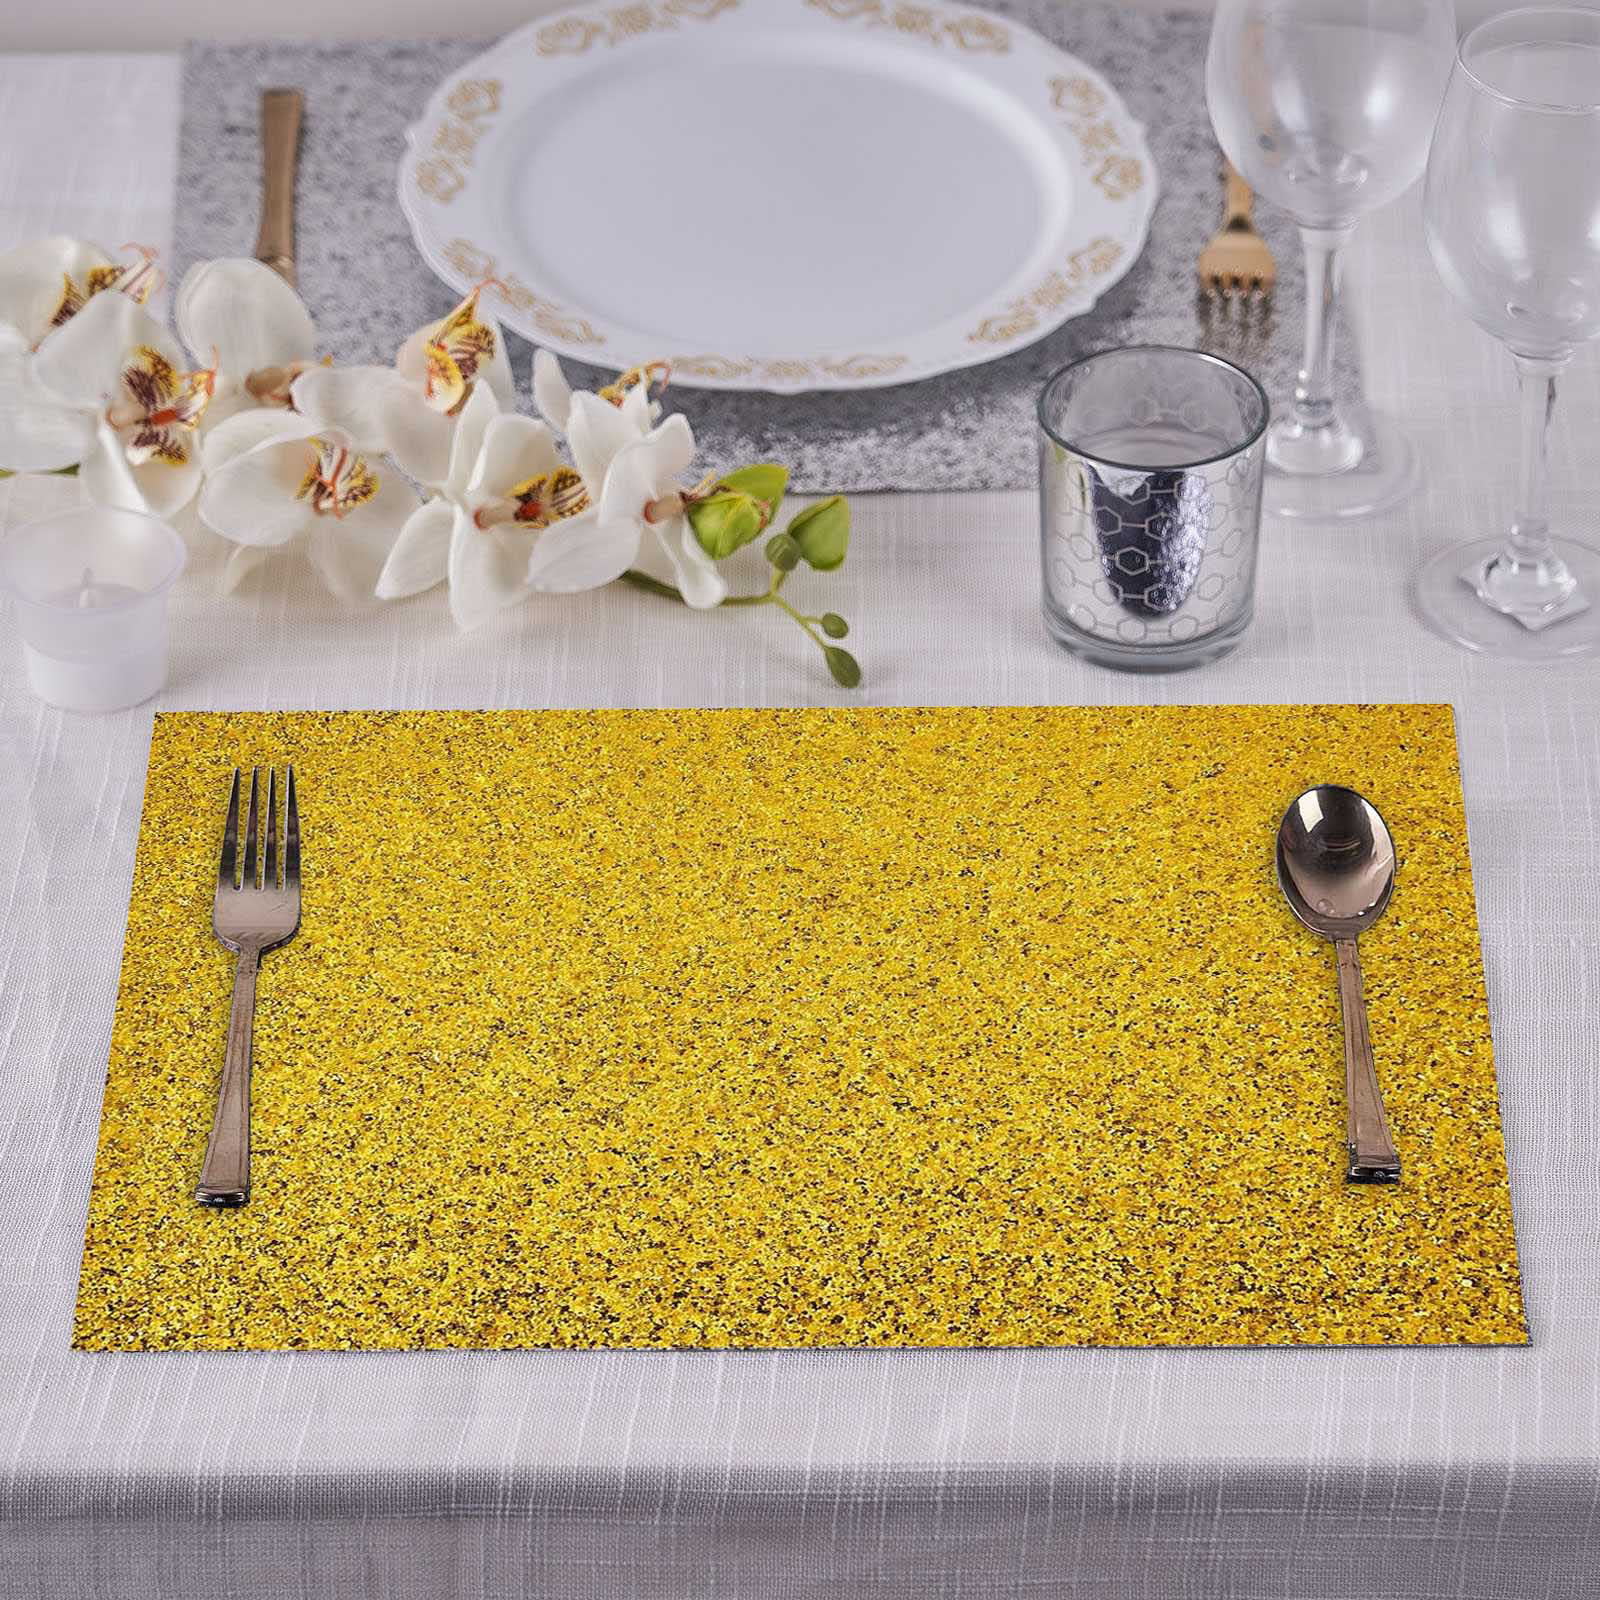 Dining placemats